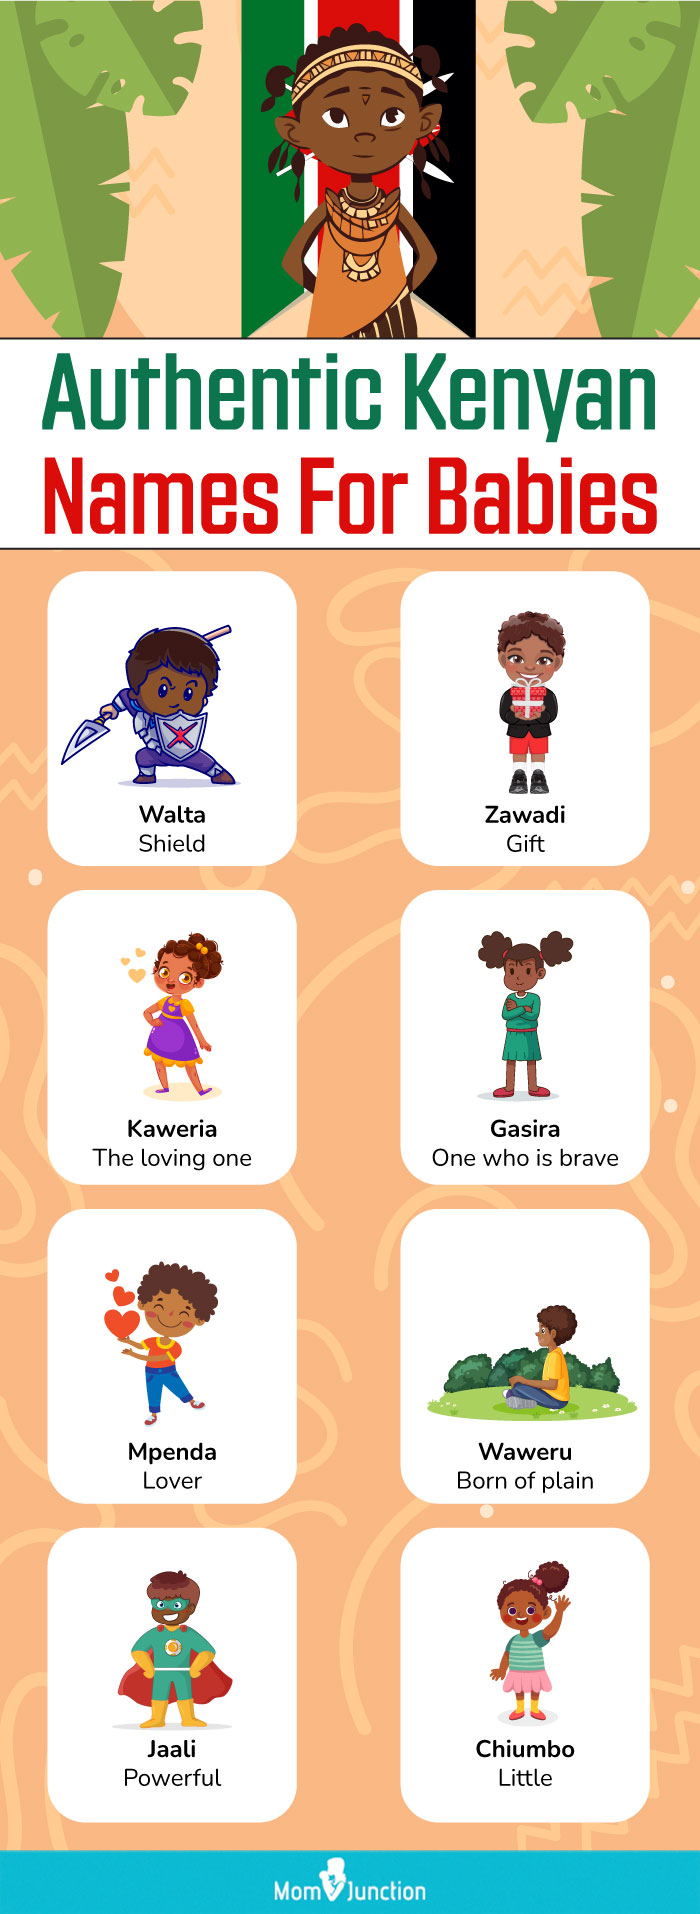 authentic kenyan names for babies (infographic)